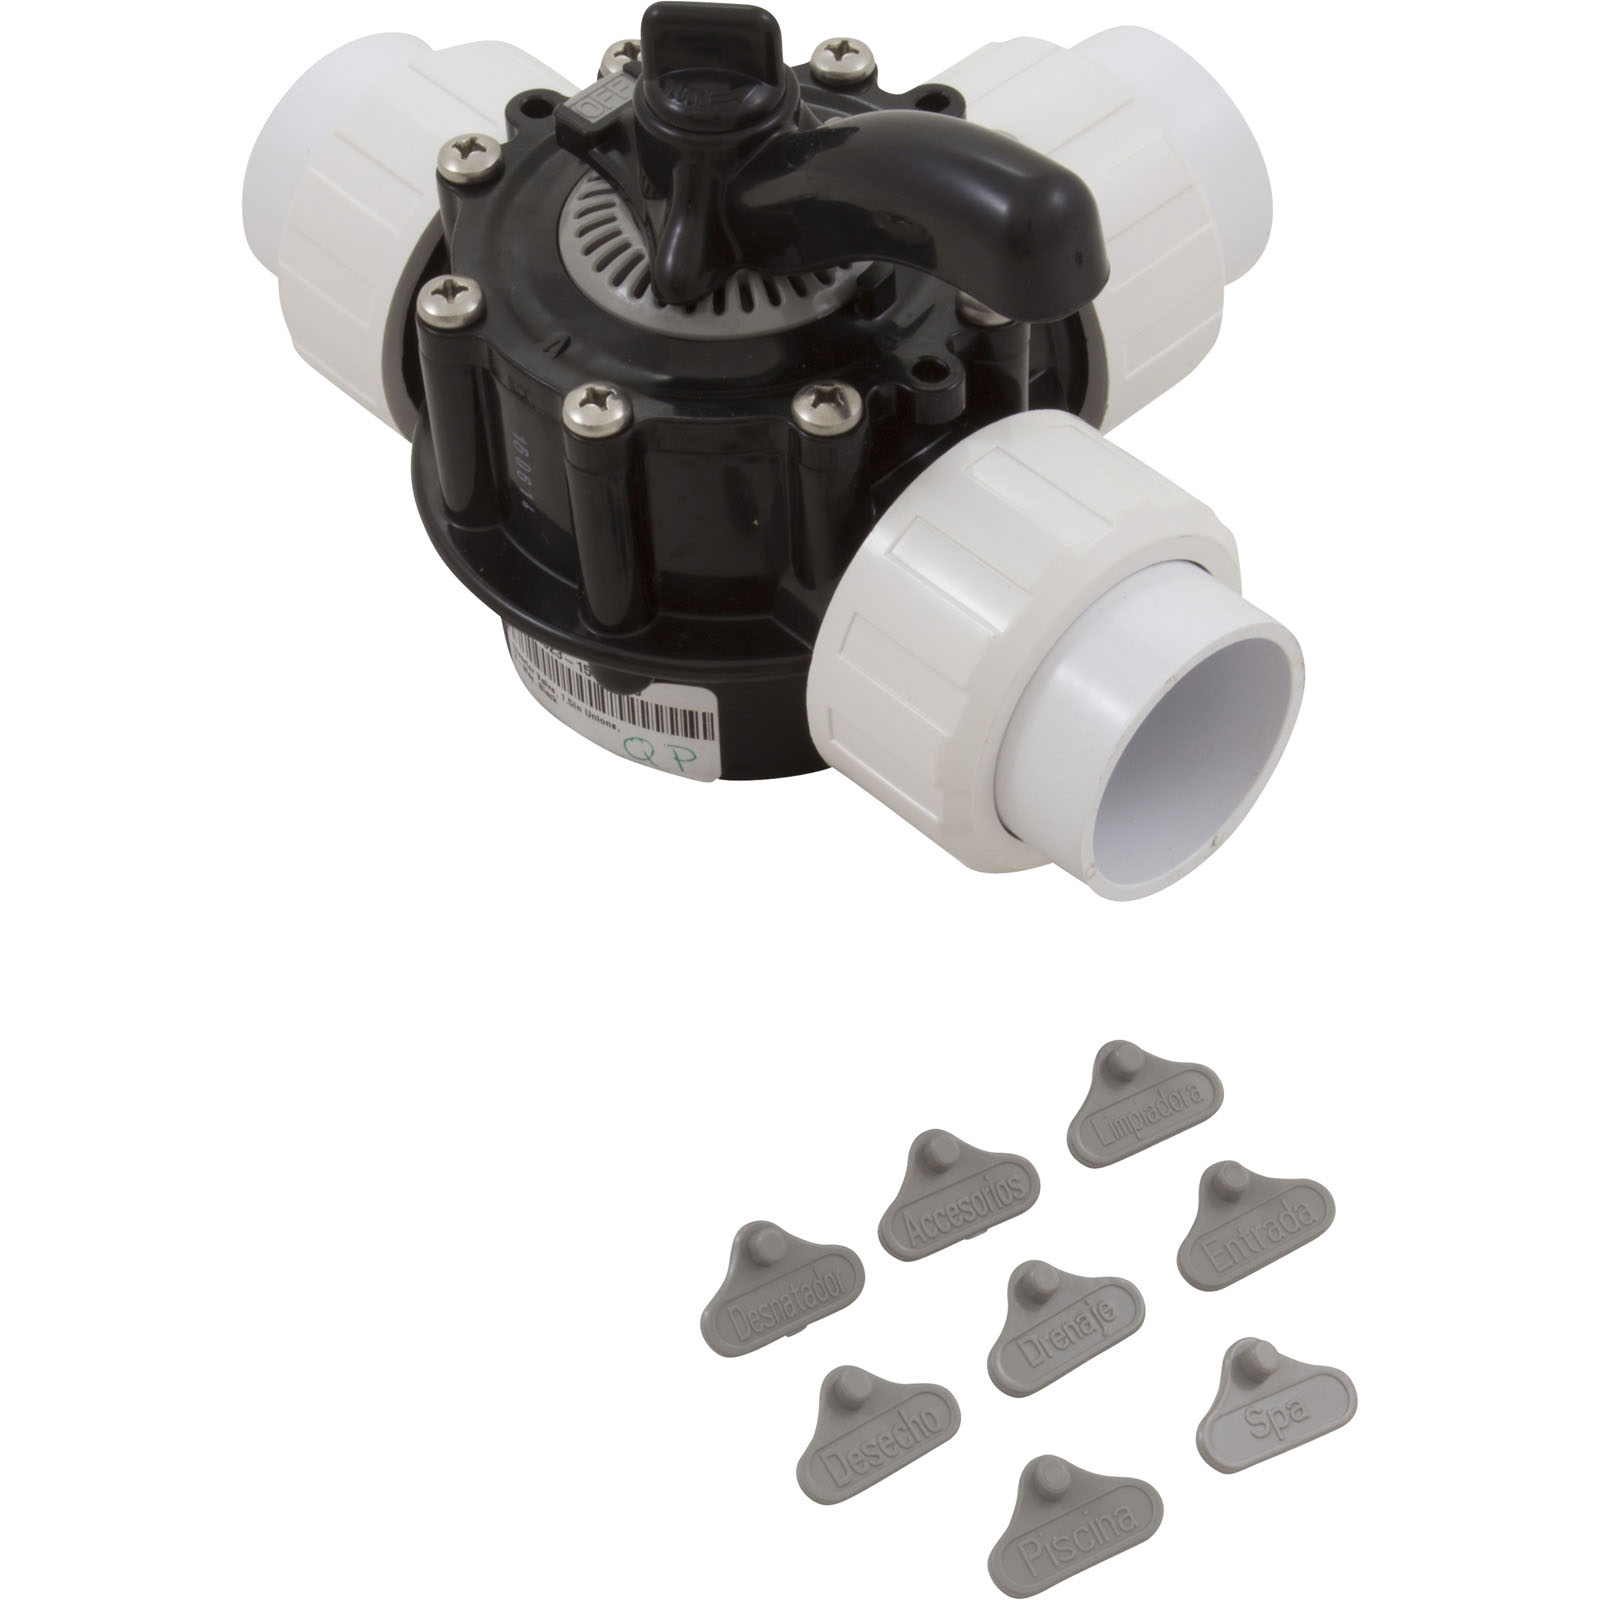 Picture of 25923-154-000 Diverter Valve 1.5In Unions 3-Way Black